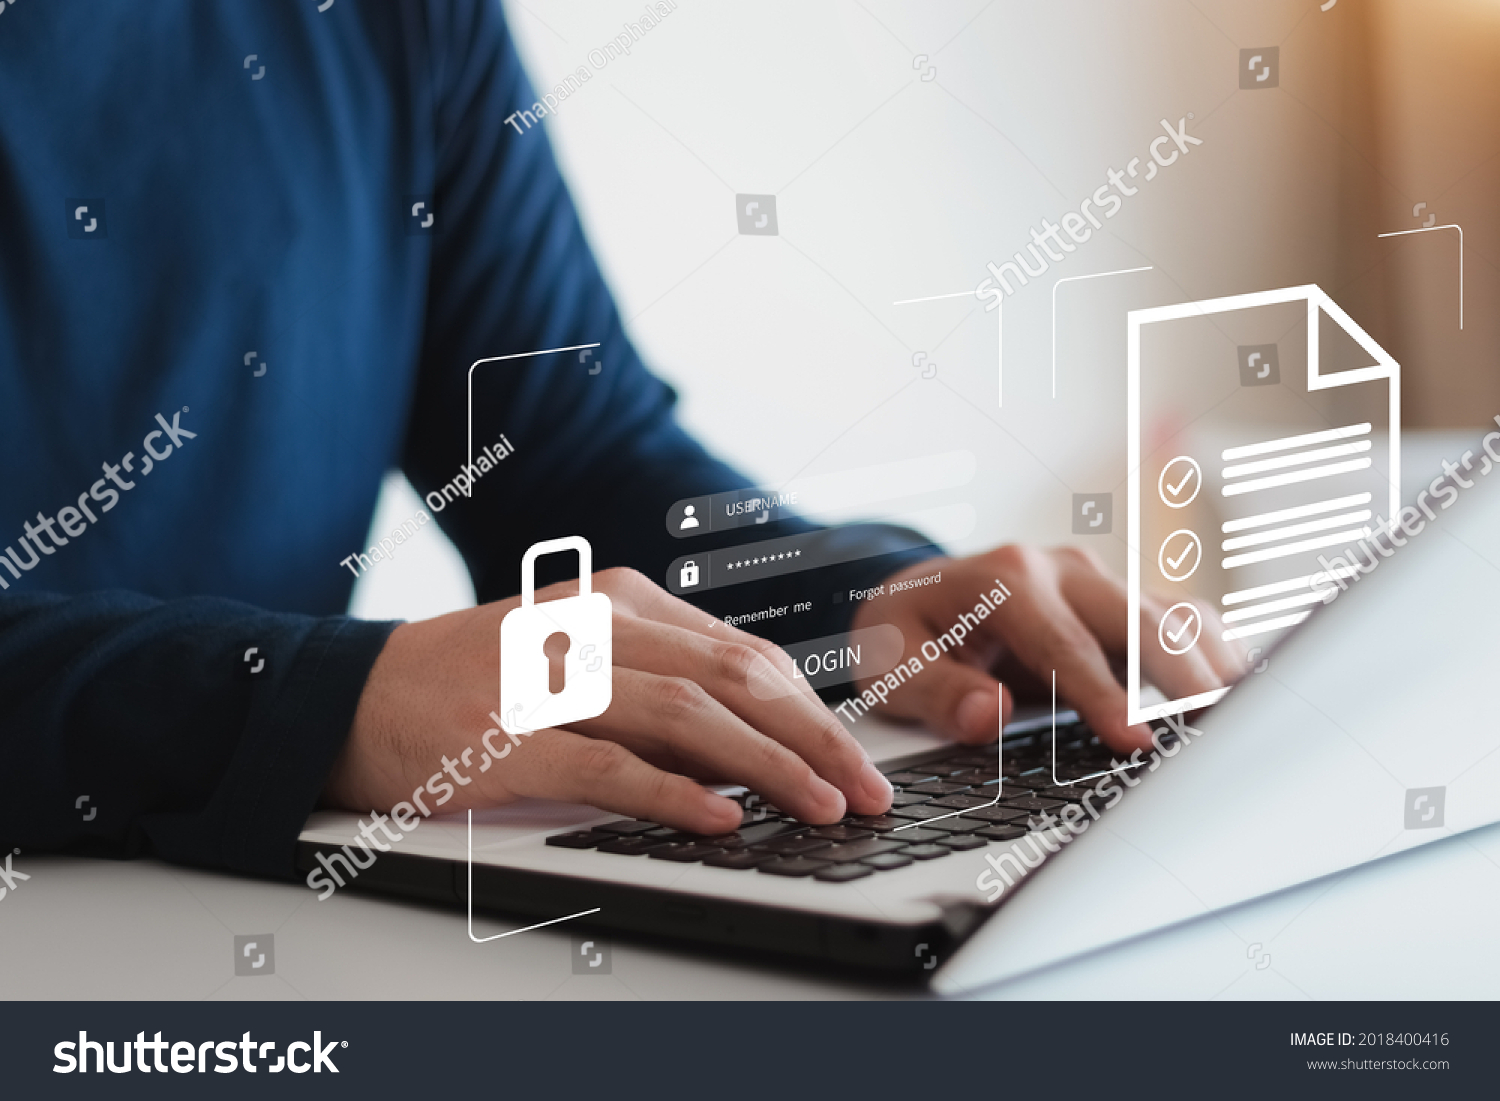 Concept of cyber security, information security and encryption, secure access to user's personal information, secure Internet access, cybersecurity. #2018400416